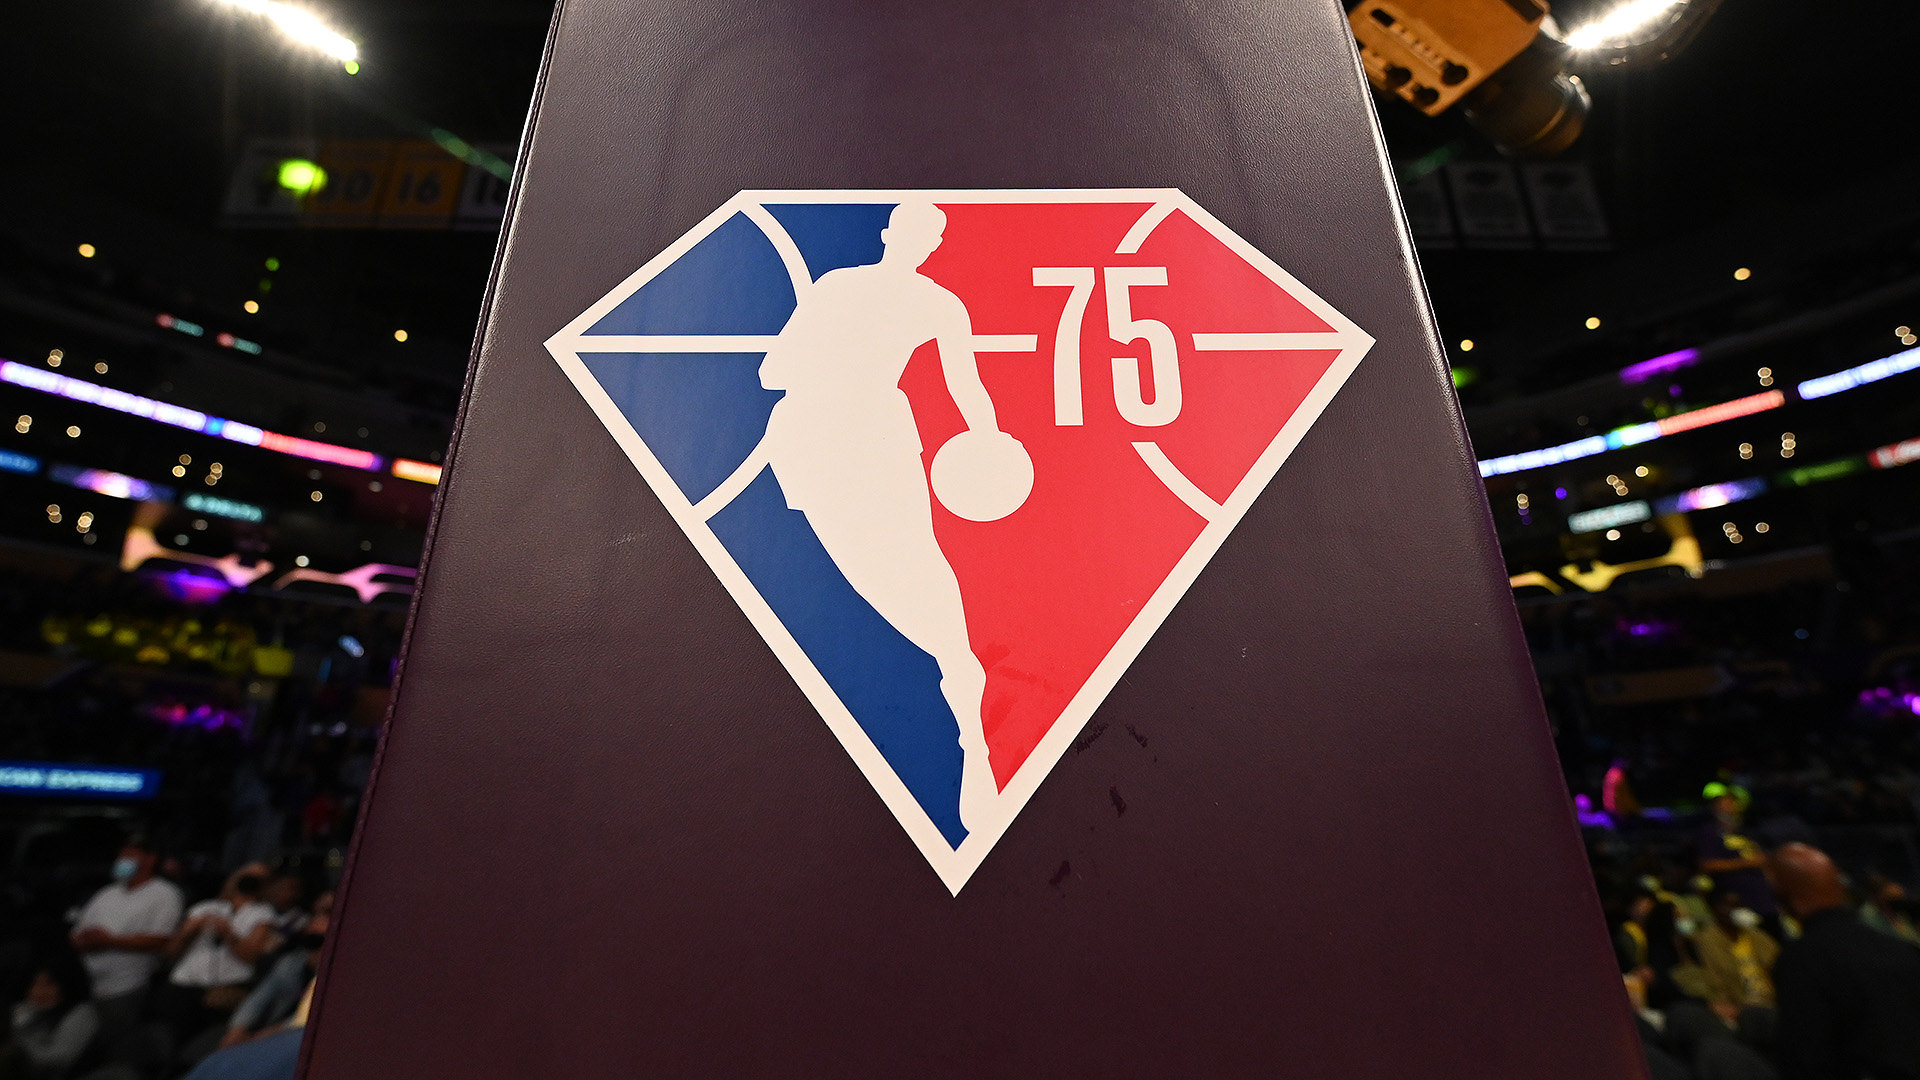 NBA Top 75 Players List Revealed